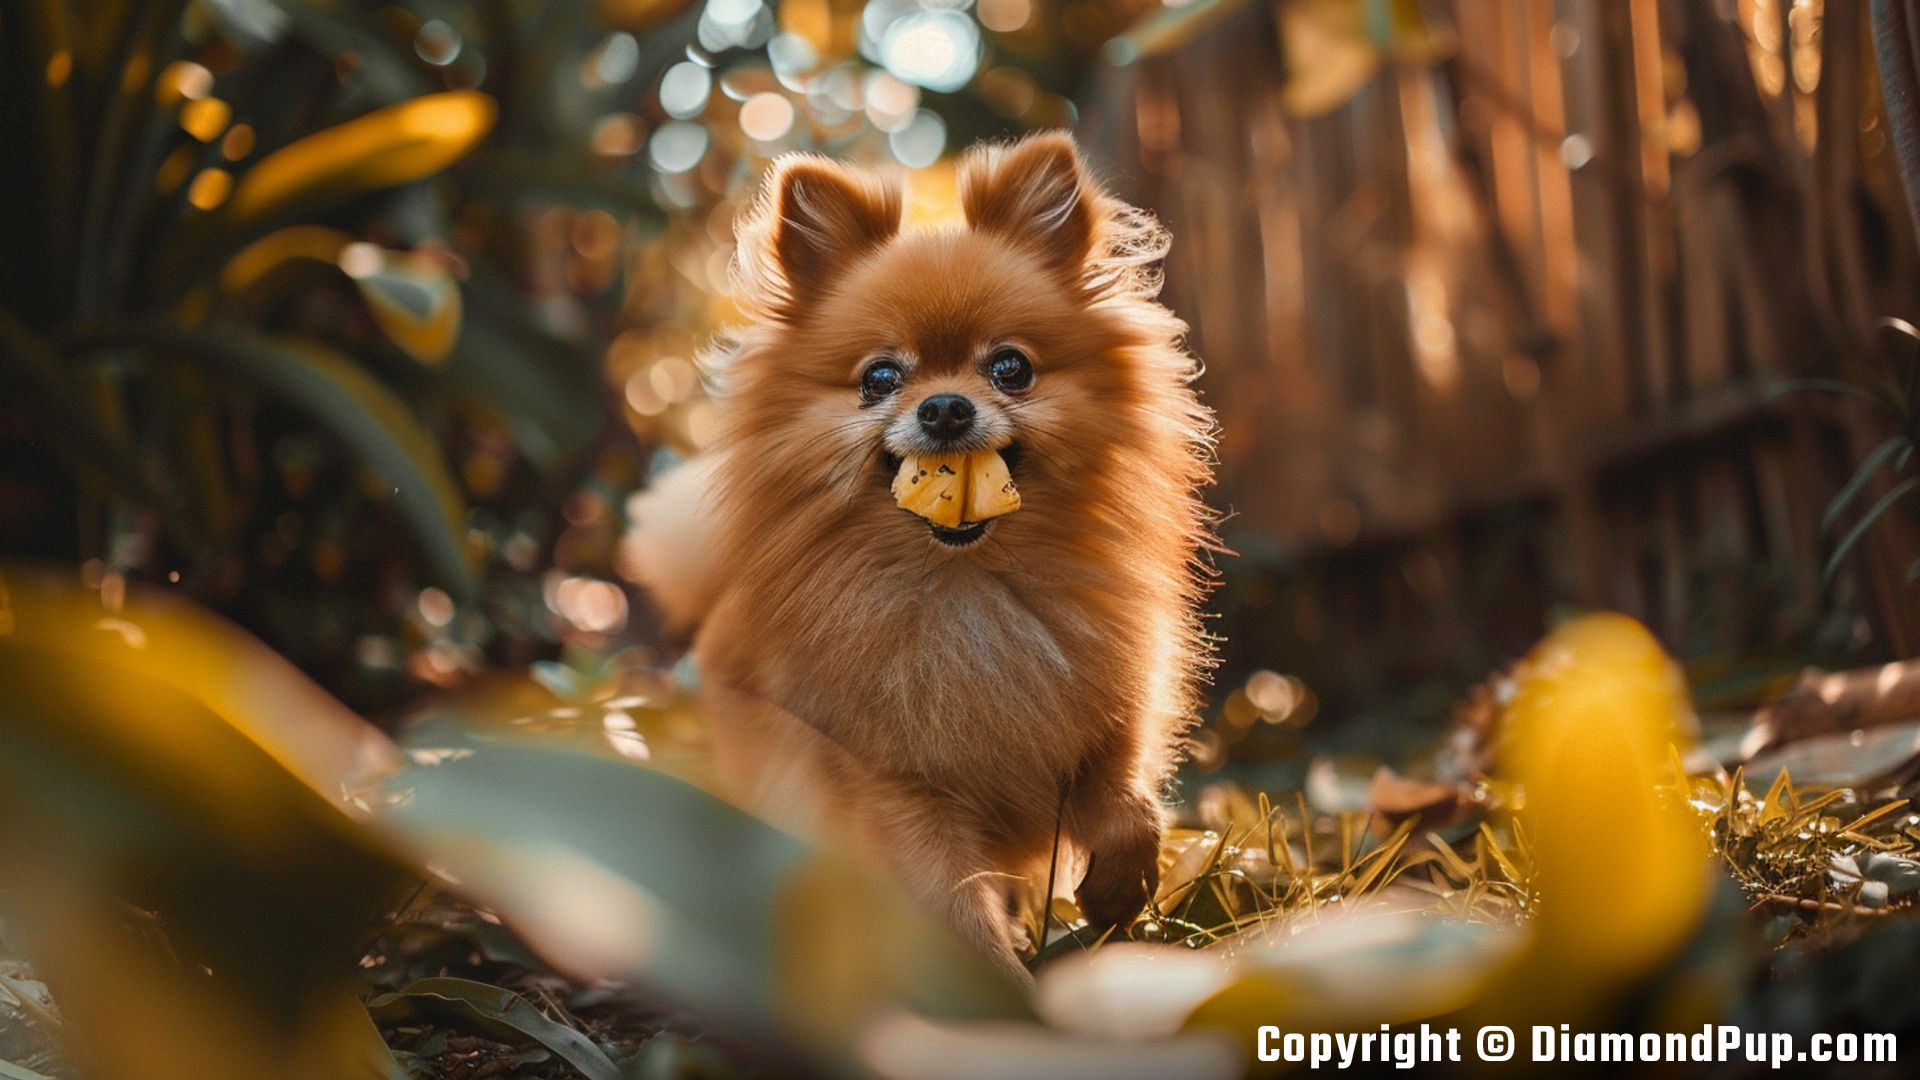 Photo of a Playful Pomeranian Snacking on Pineapple